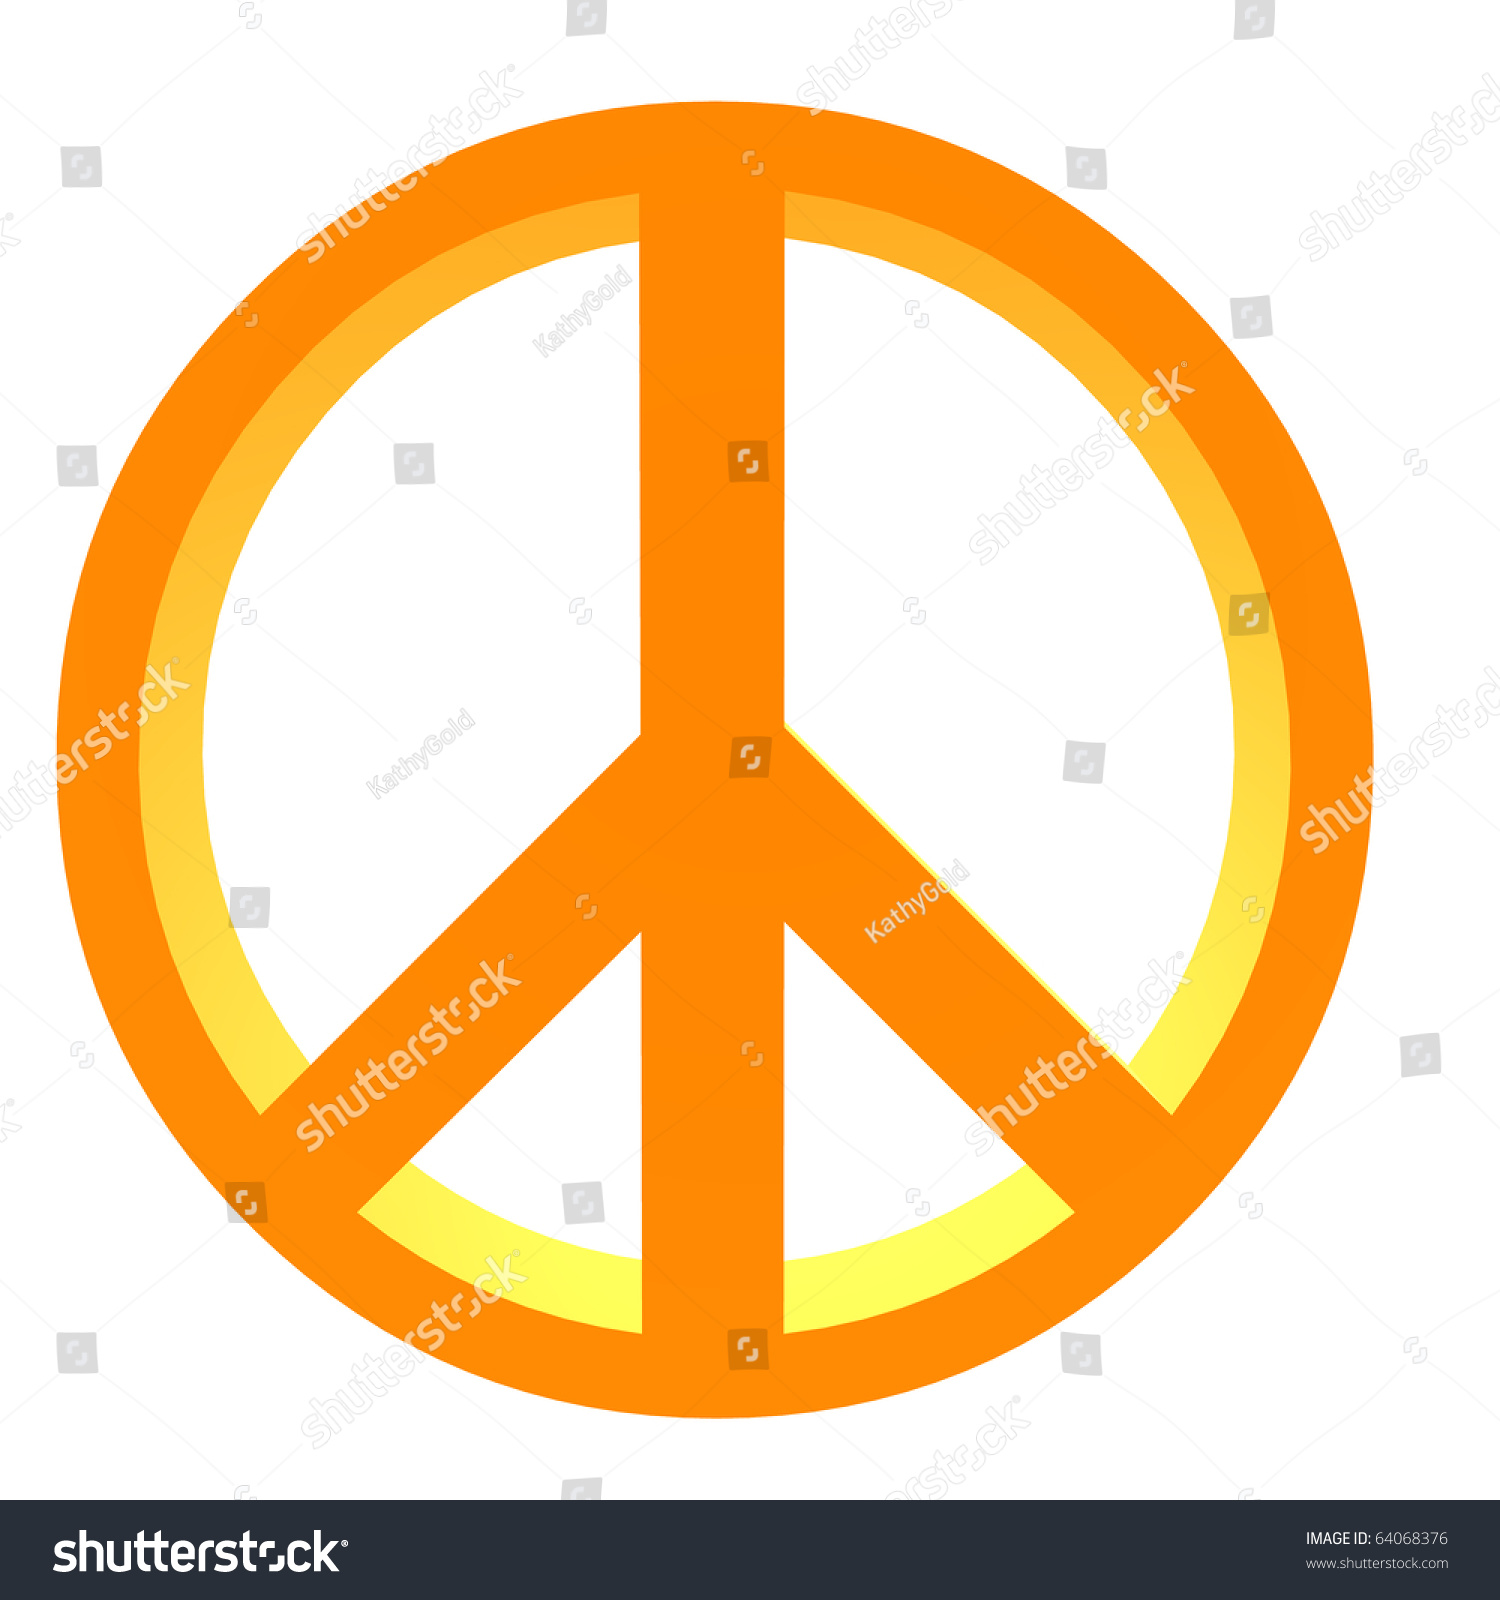 3d Orange Peace Sign On A White Background Stock Photo 64068376 ...